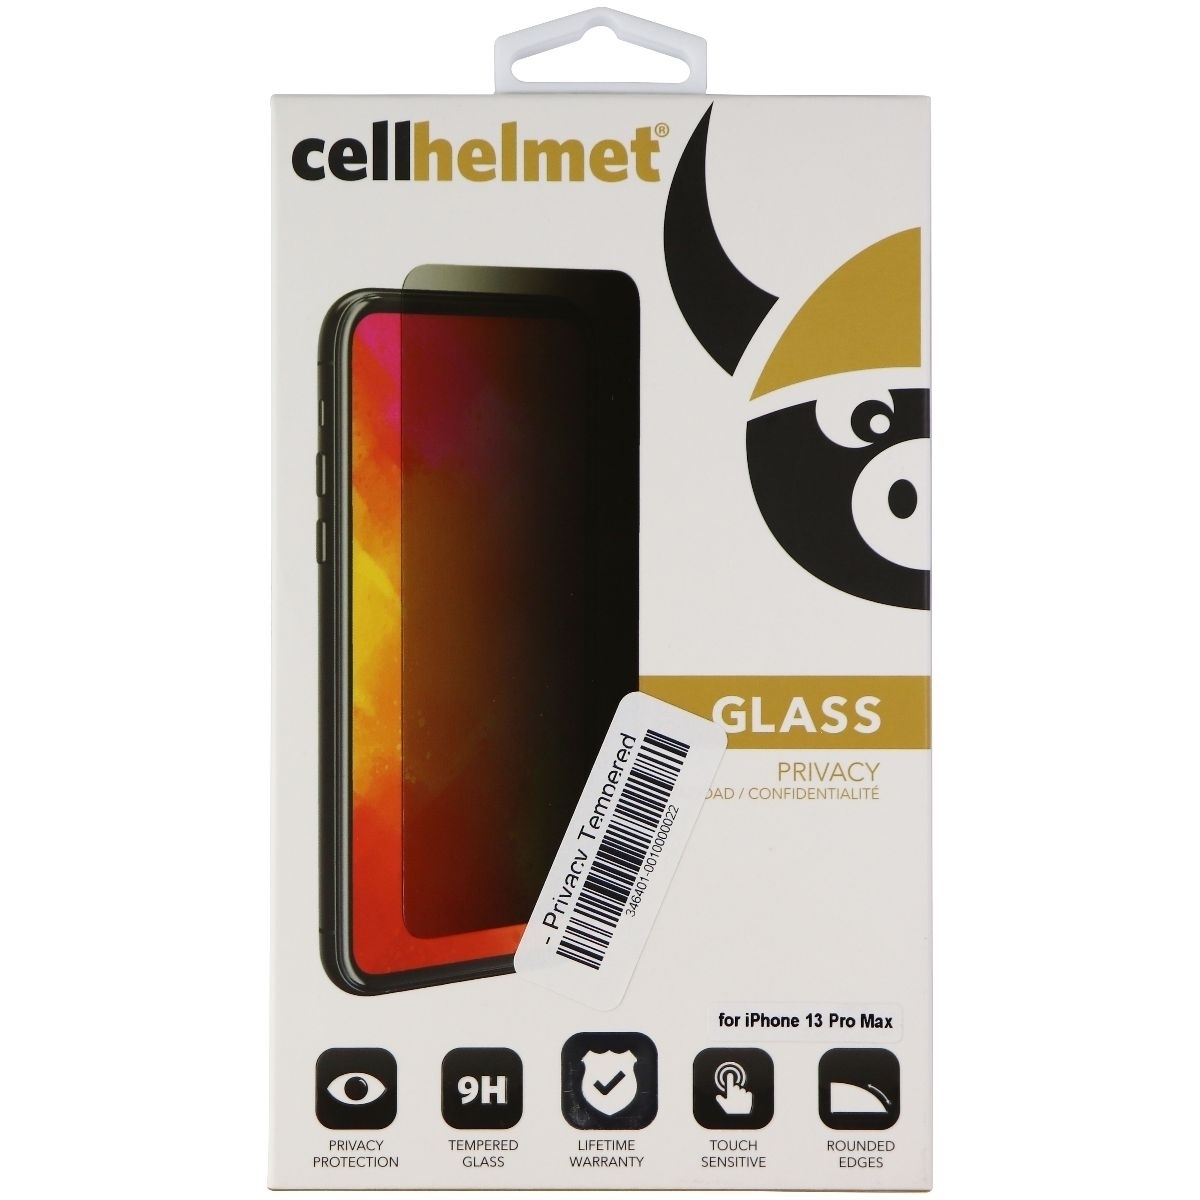 Cellhelmet Privacy Tempered Glass Screen Protector For IPhone 13 Pro Max - Black